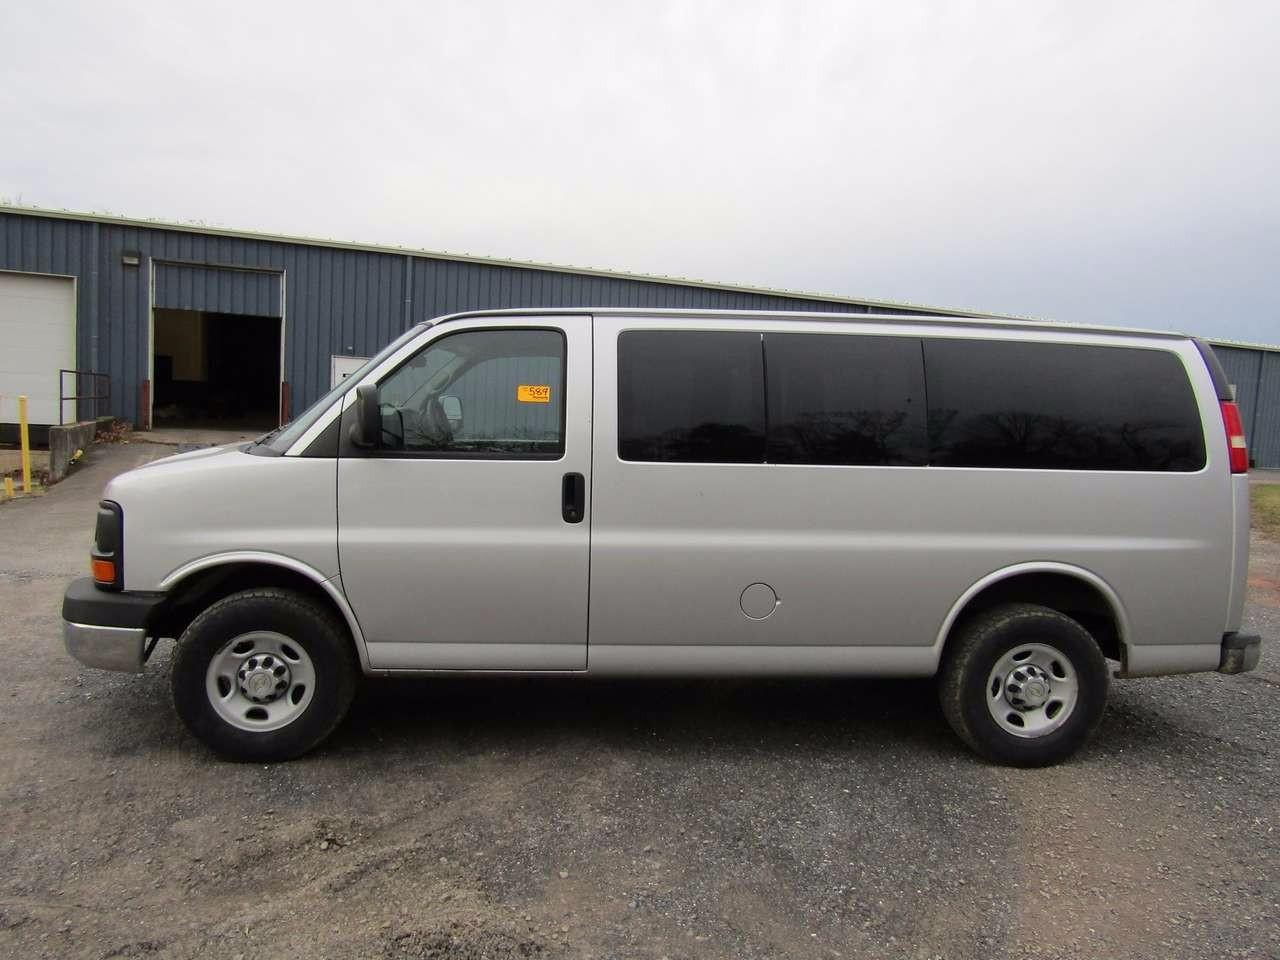 2011 chevy express